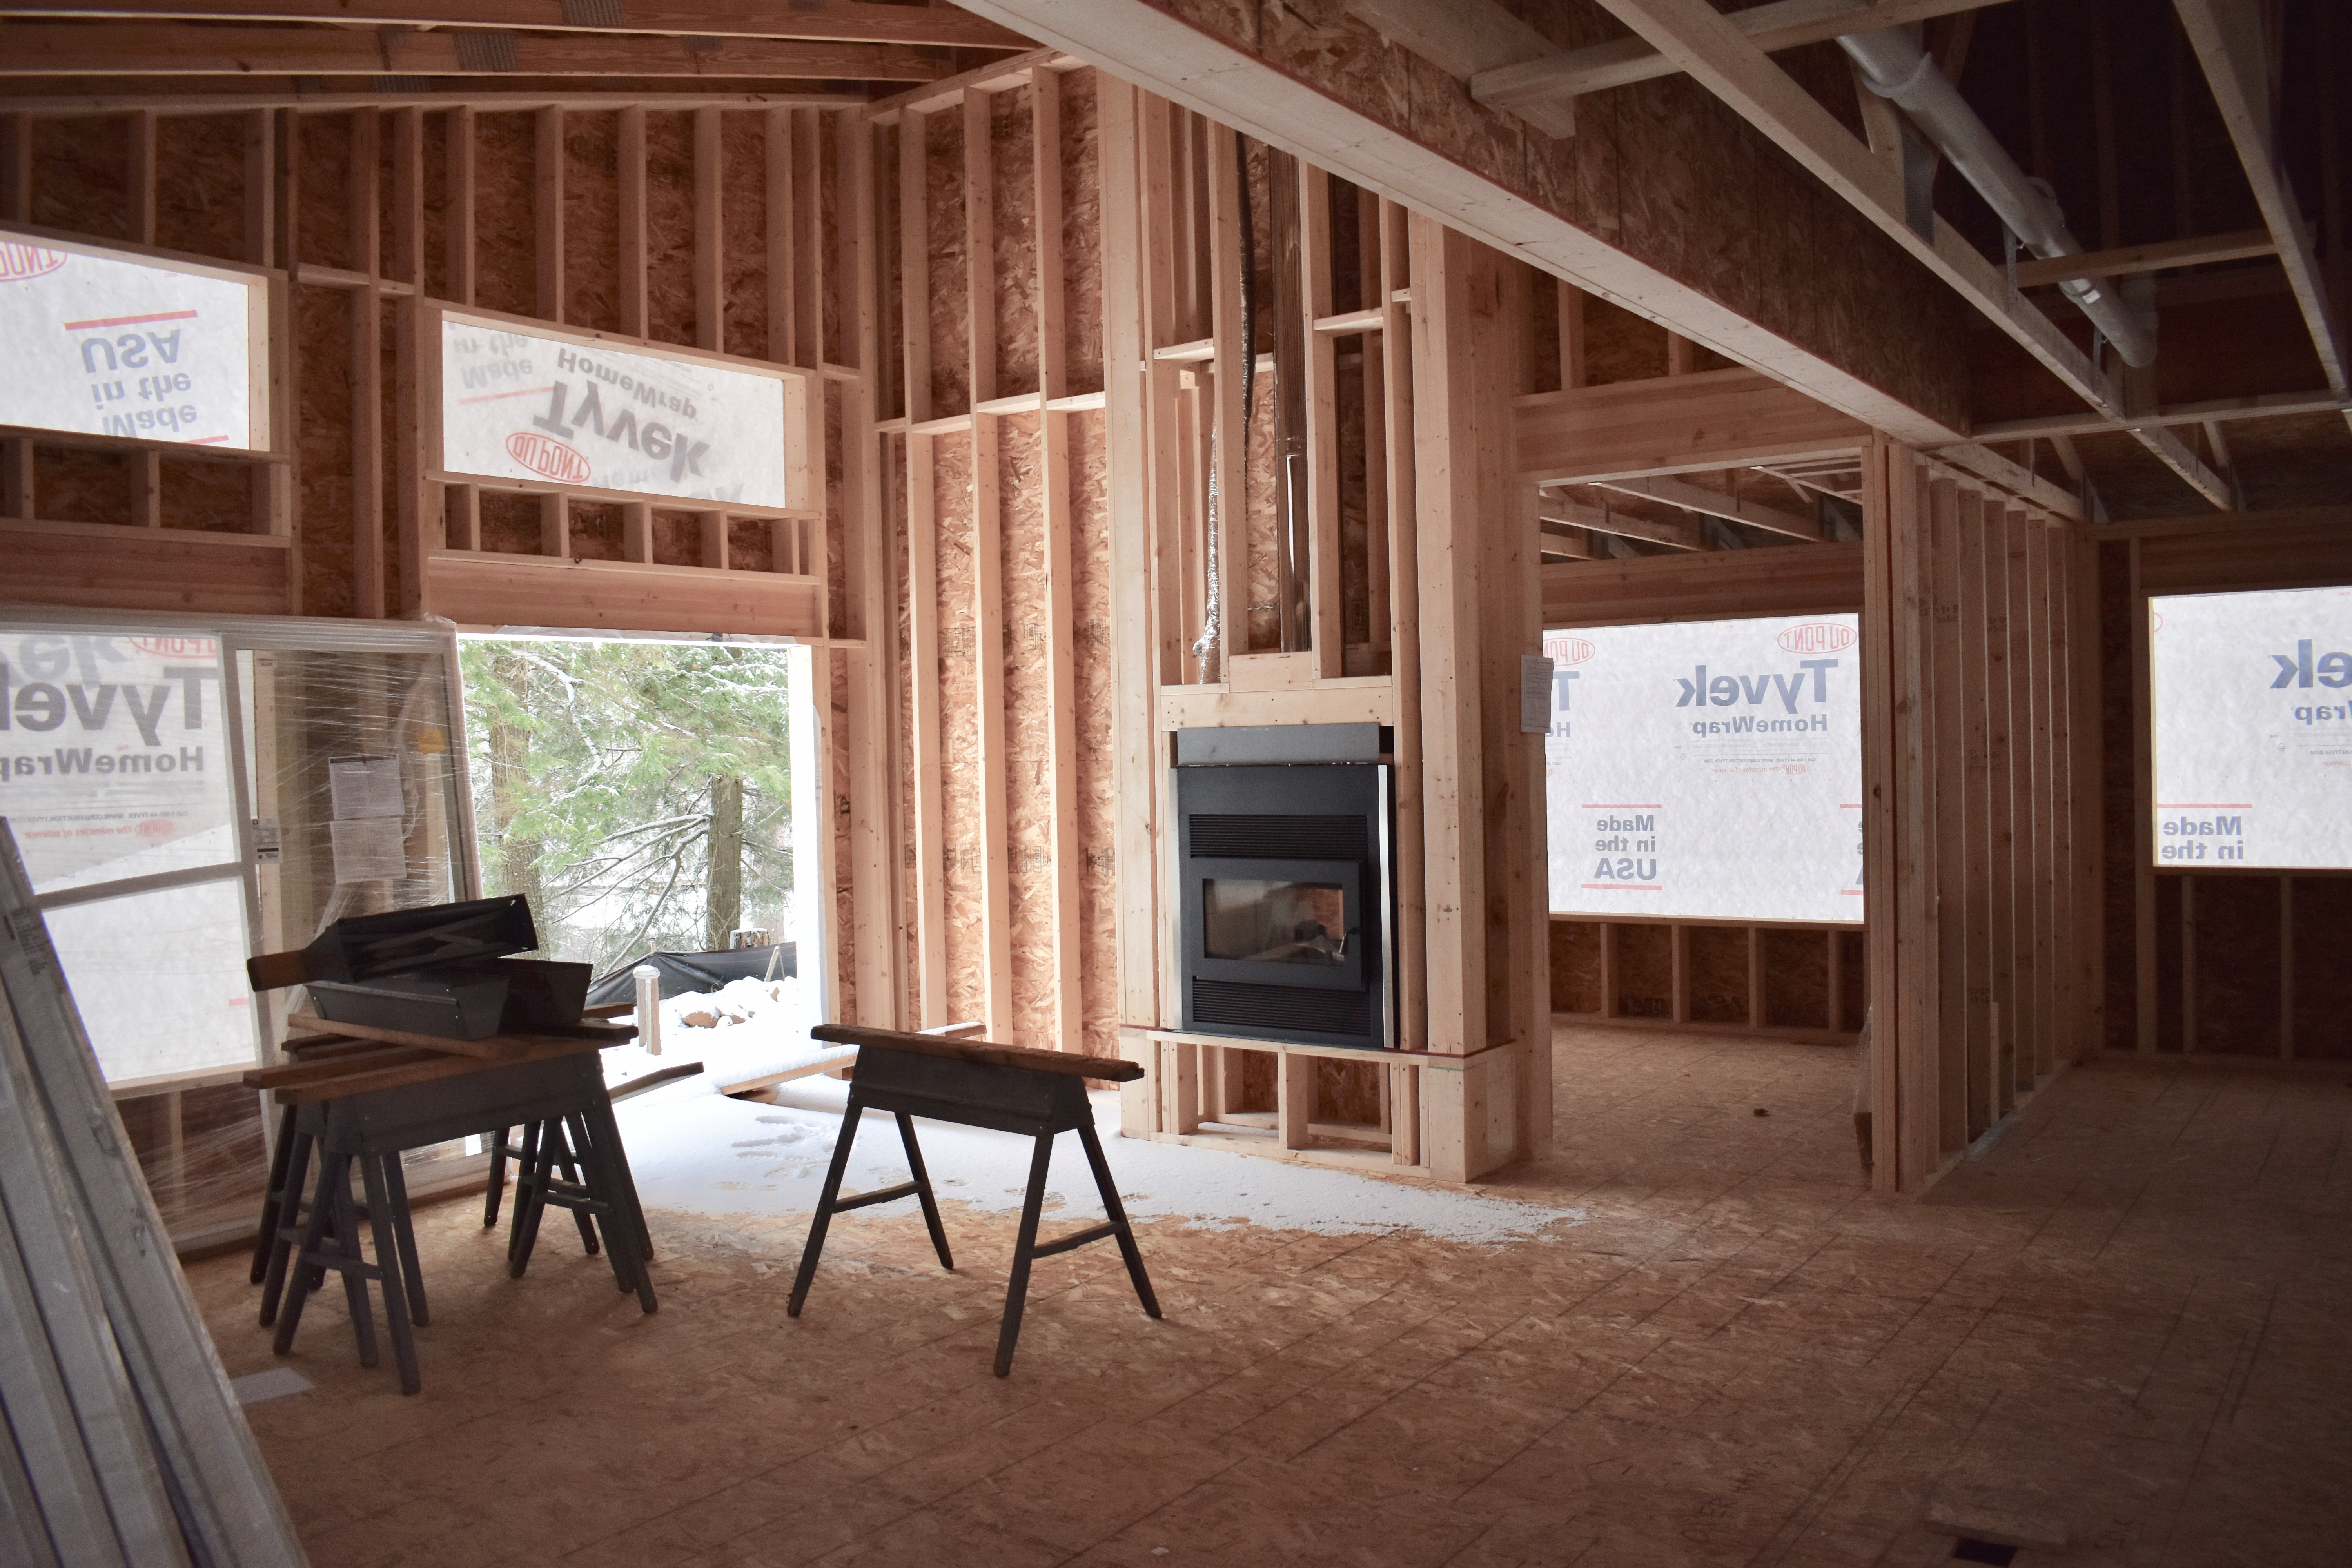 Interior of a home currently under construction - exposed beams, unfinished walls, and unfinished flooring can be seen. There is a fireplace installed in the wall. 